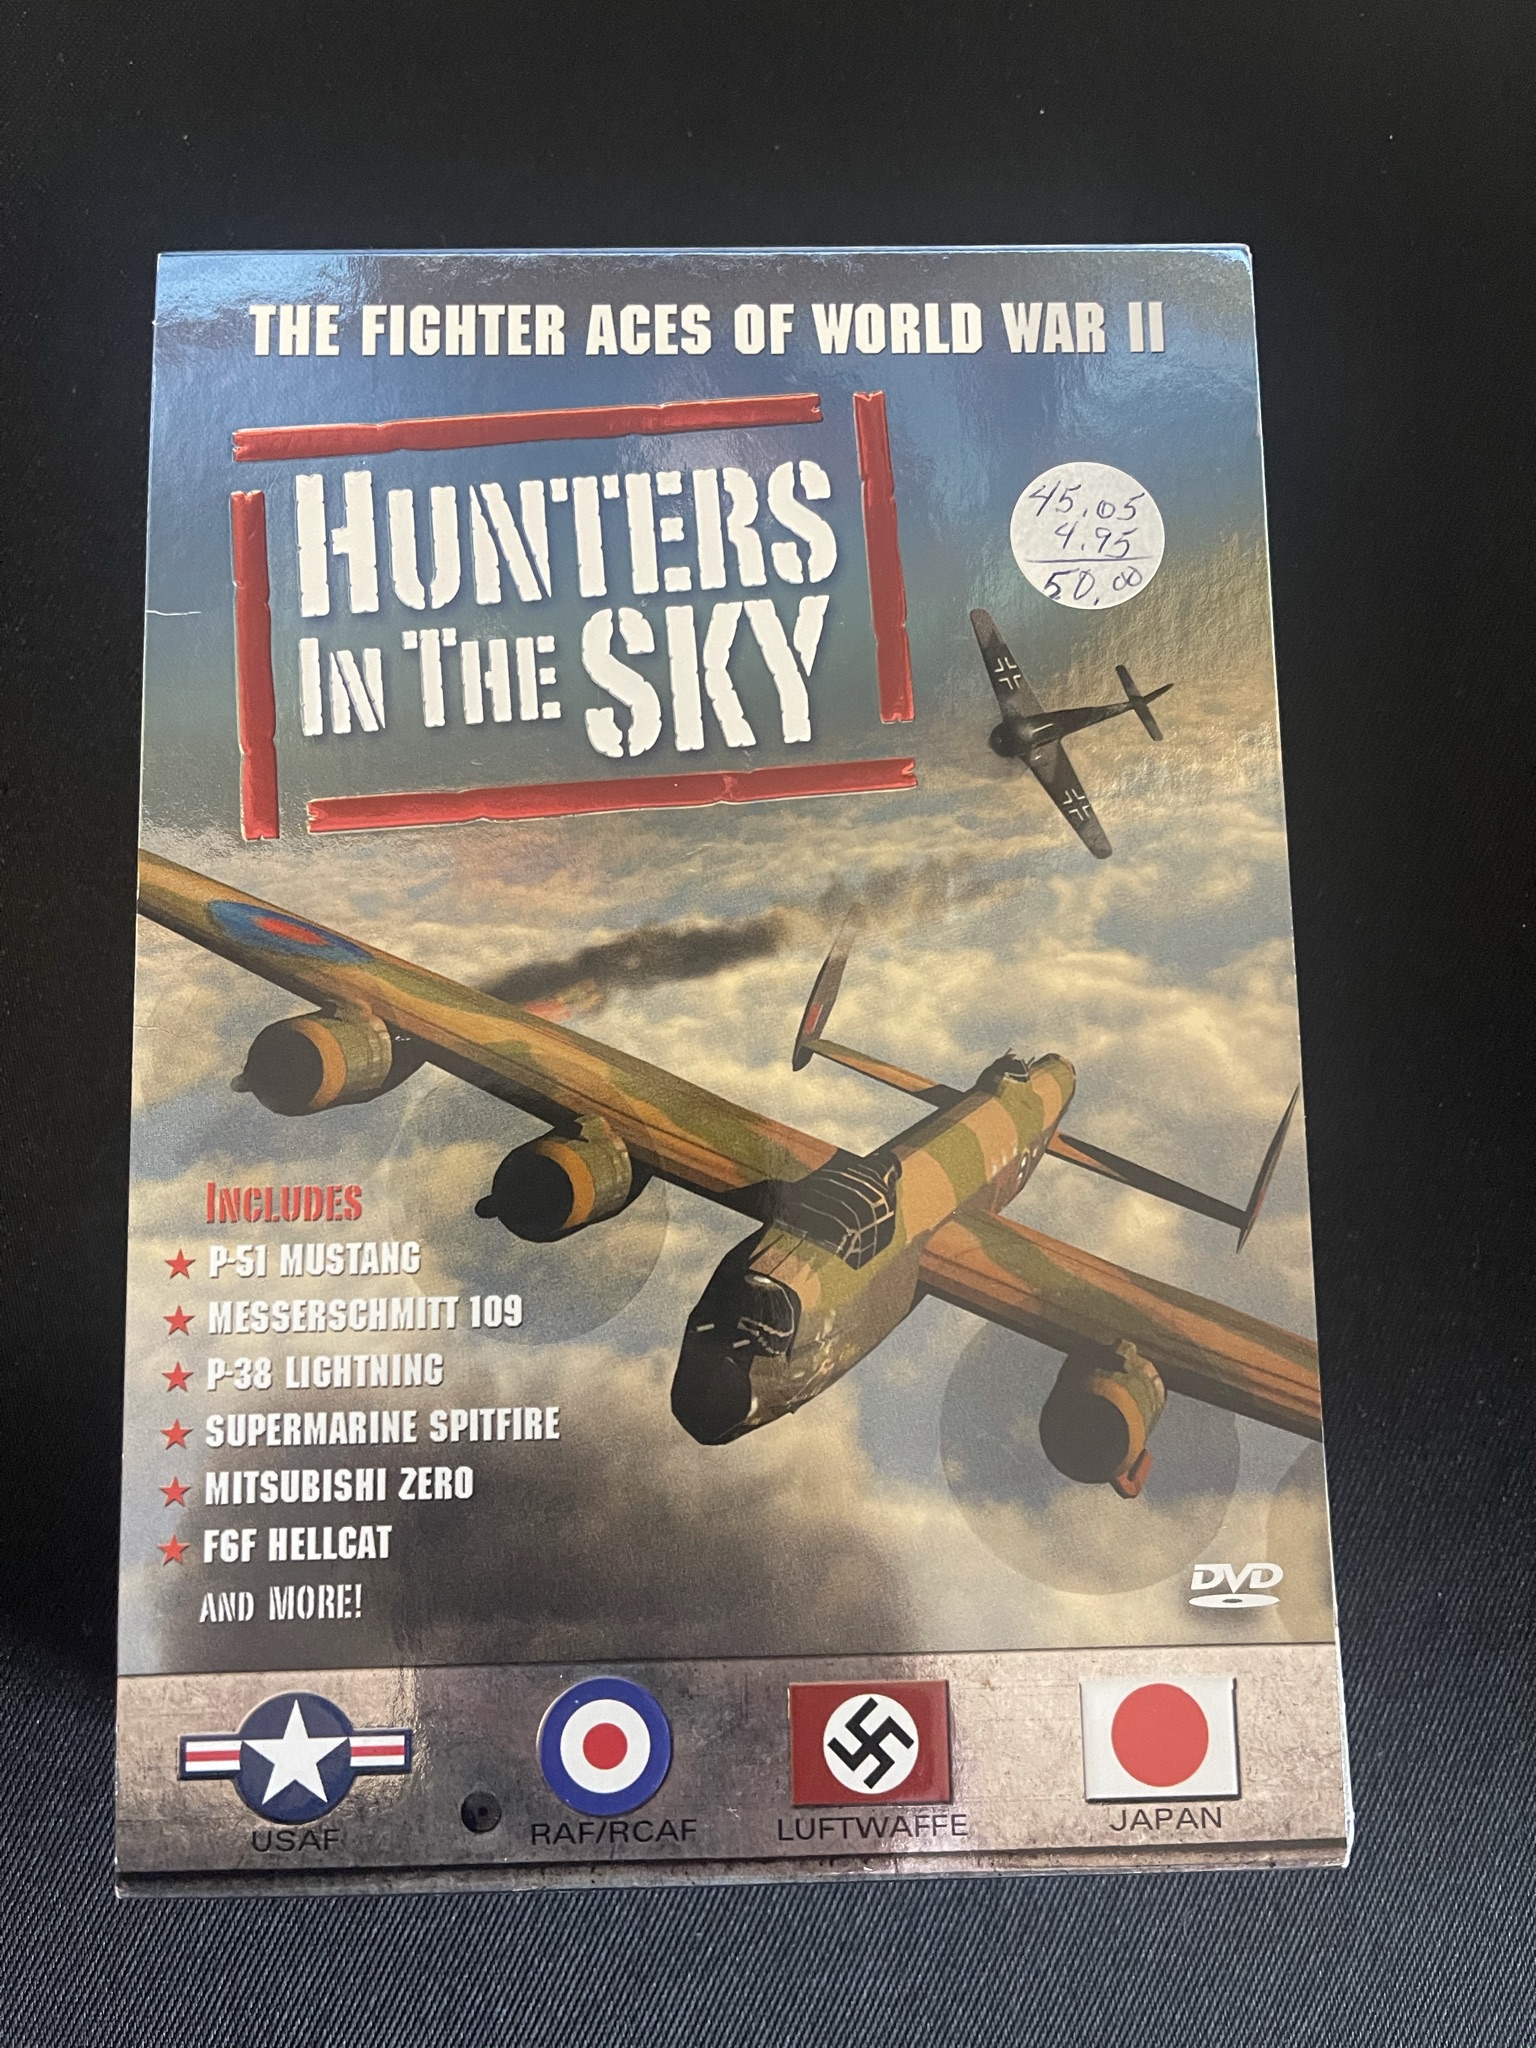 Featured image for “Hunters in the Sky”